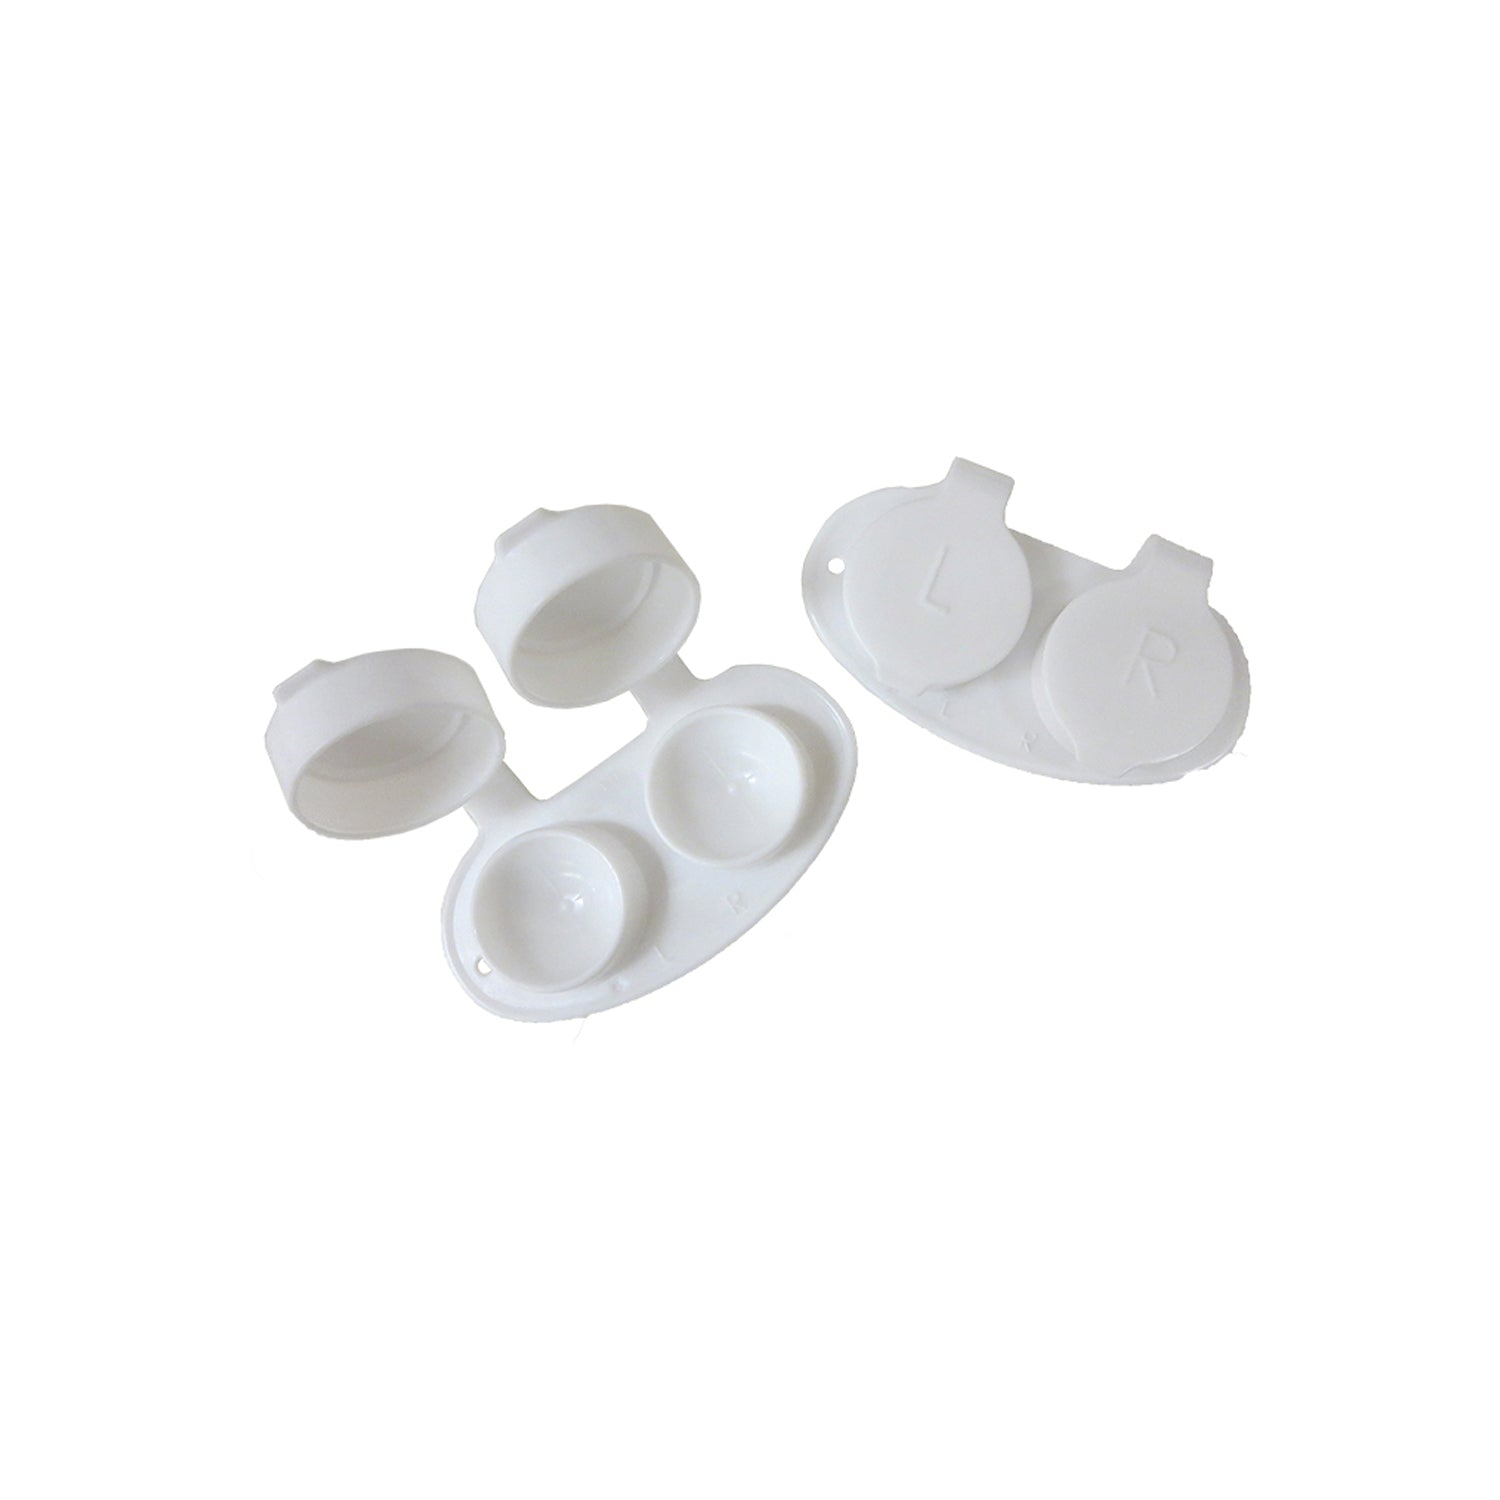 Flip-top Cases for Soft Contact Lenses